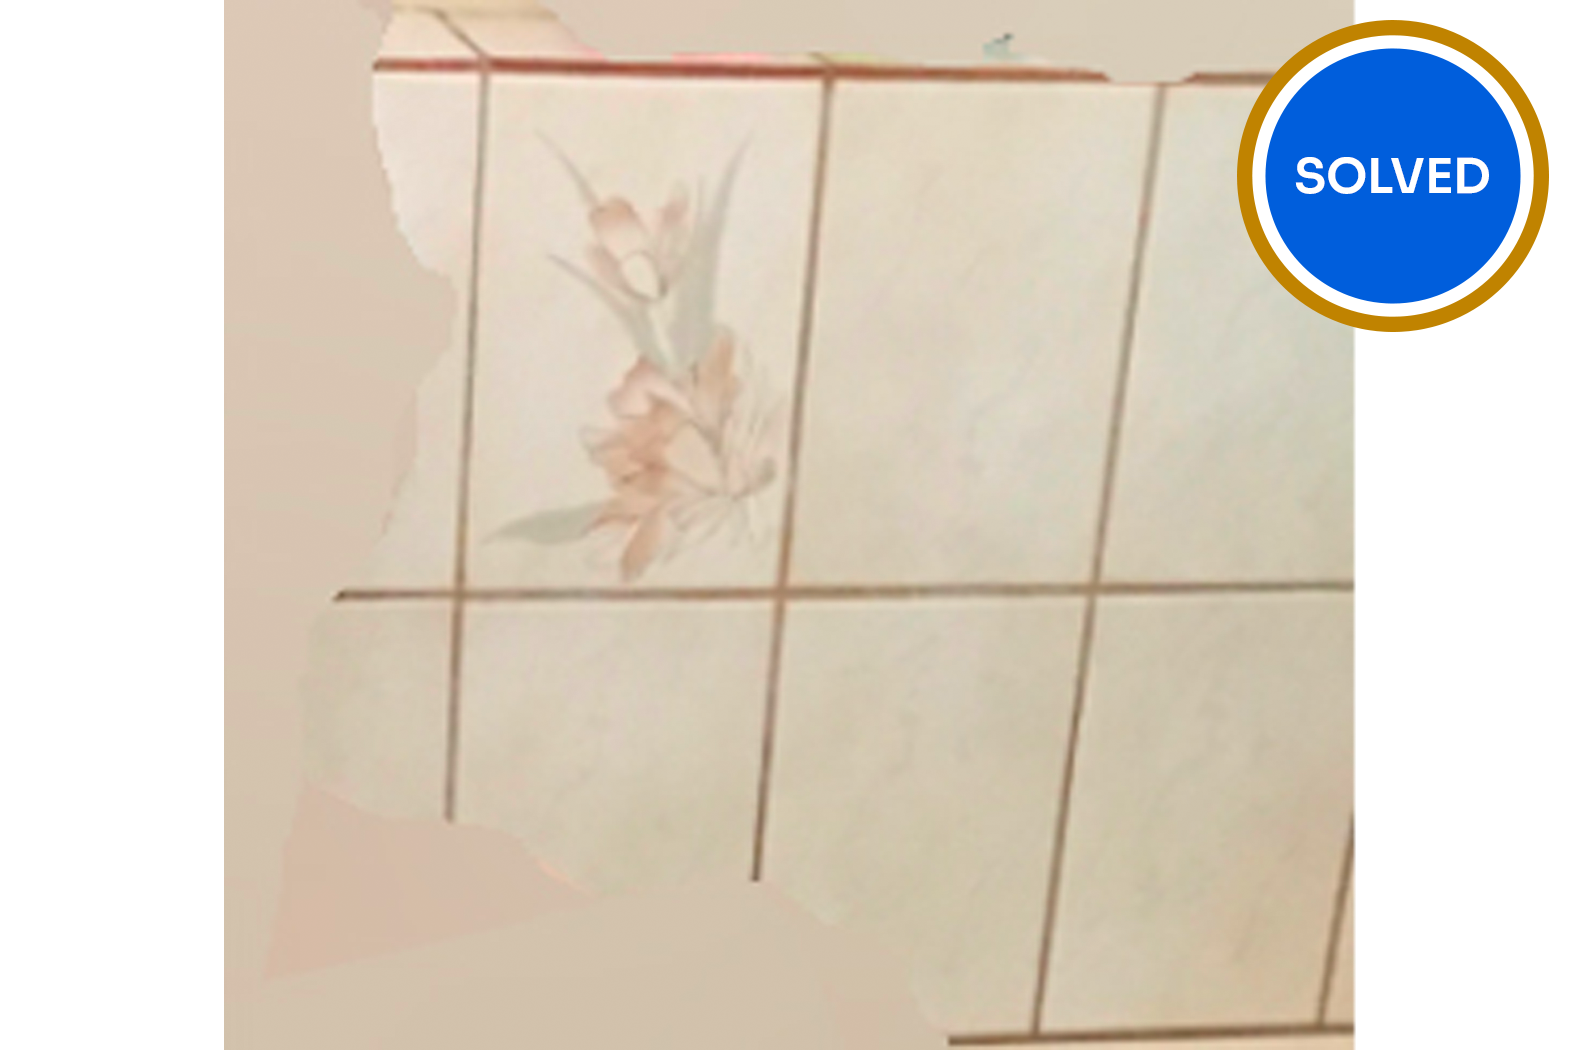 Bathroom tiles with one flower feature tile with solved banner